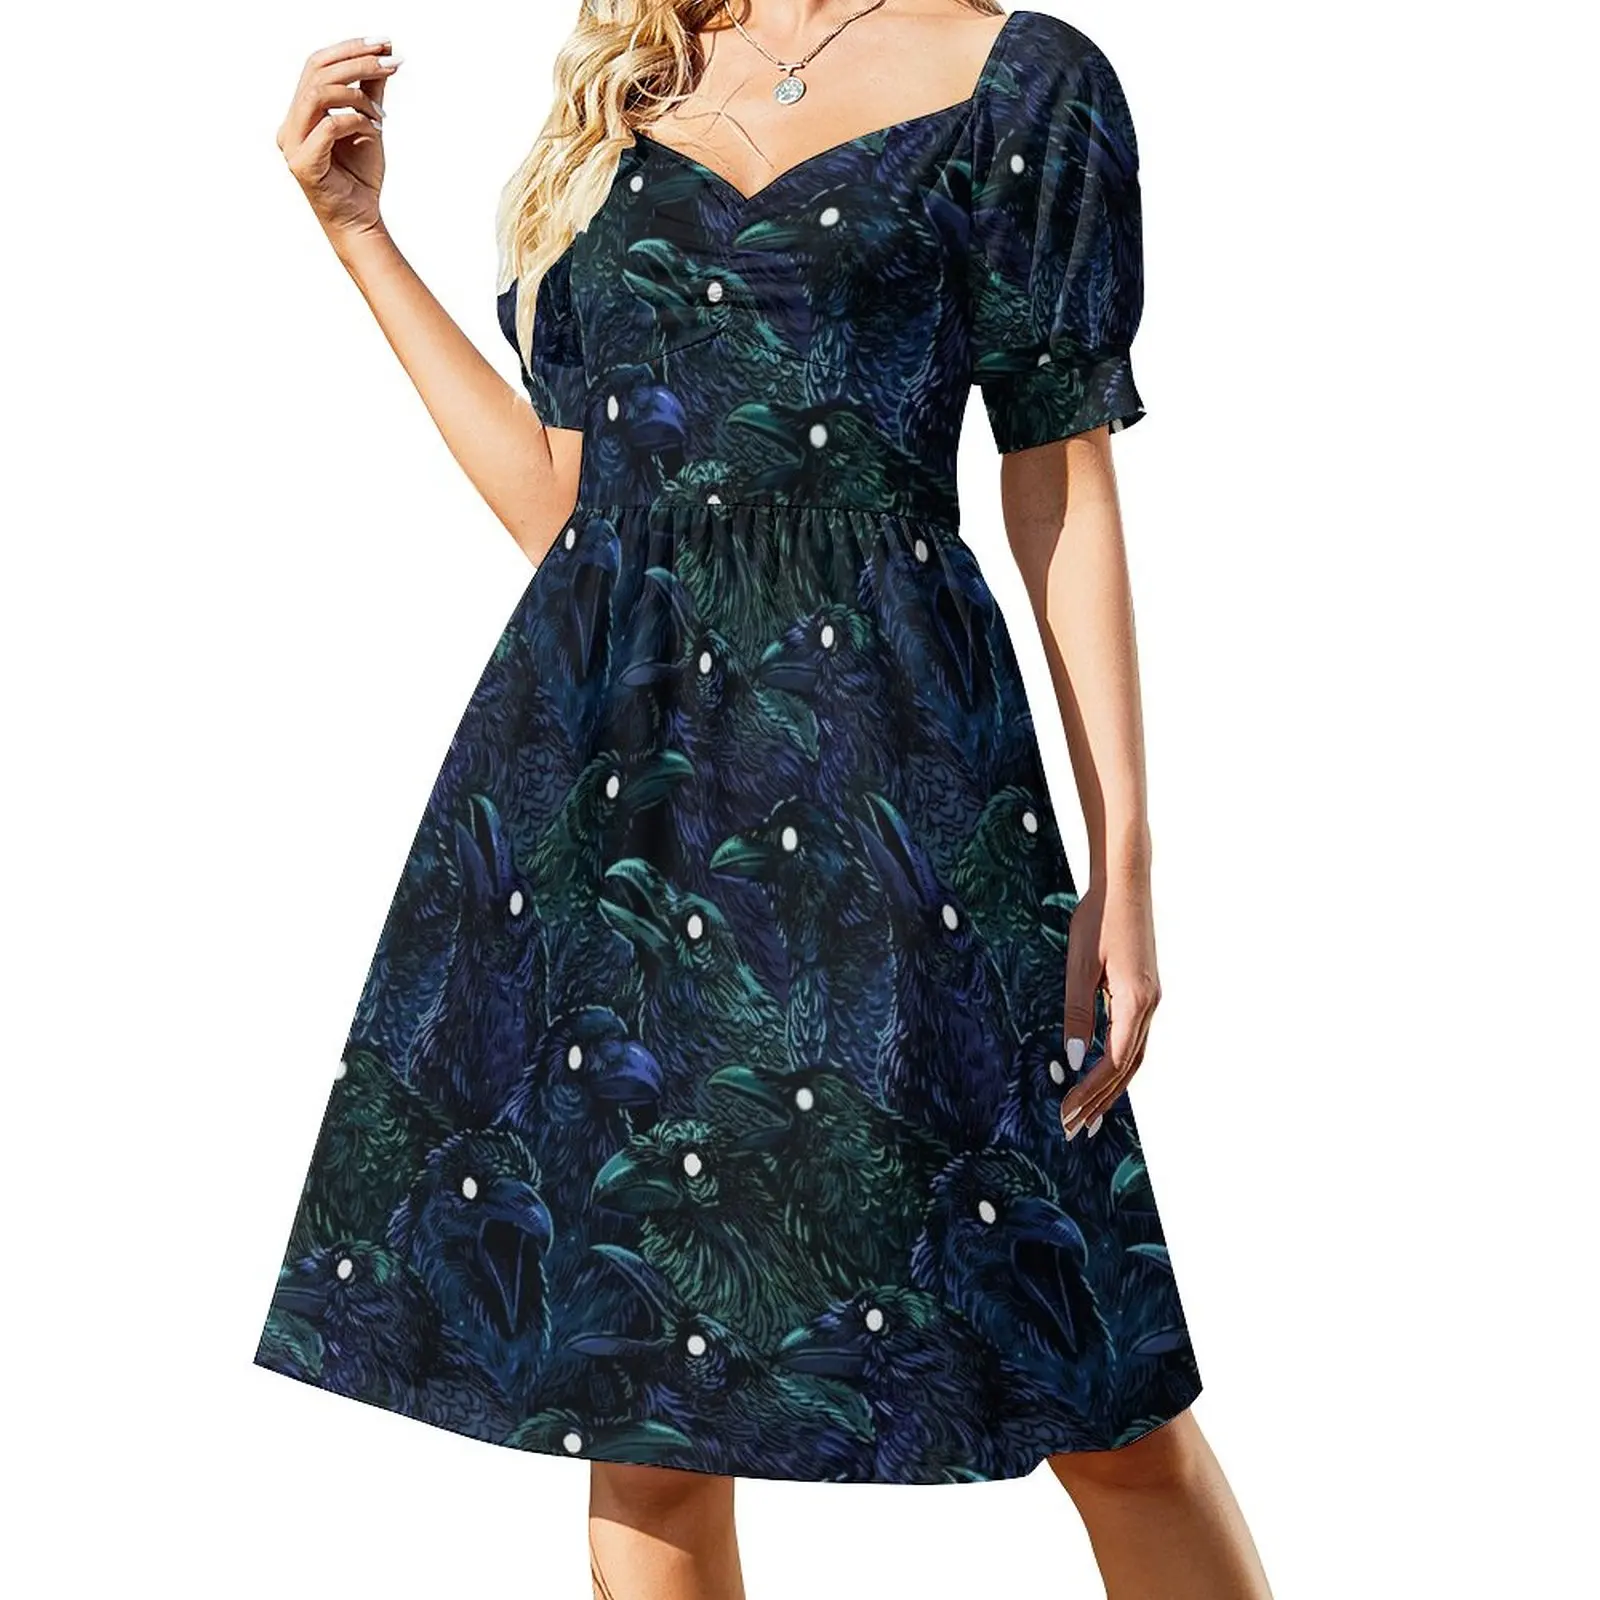 Raven pattern Dress Casual dresses beach outfits for women prom dresses 2023